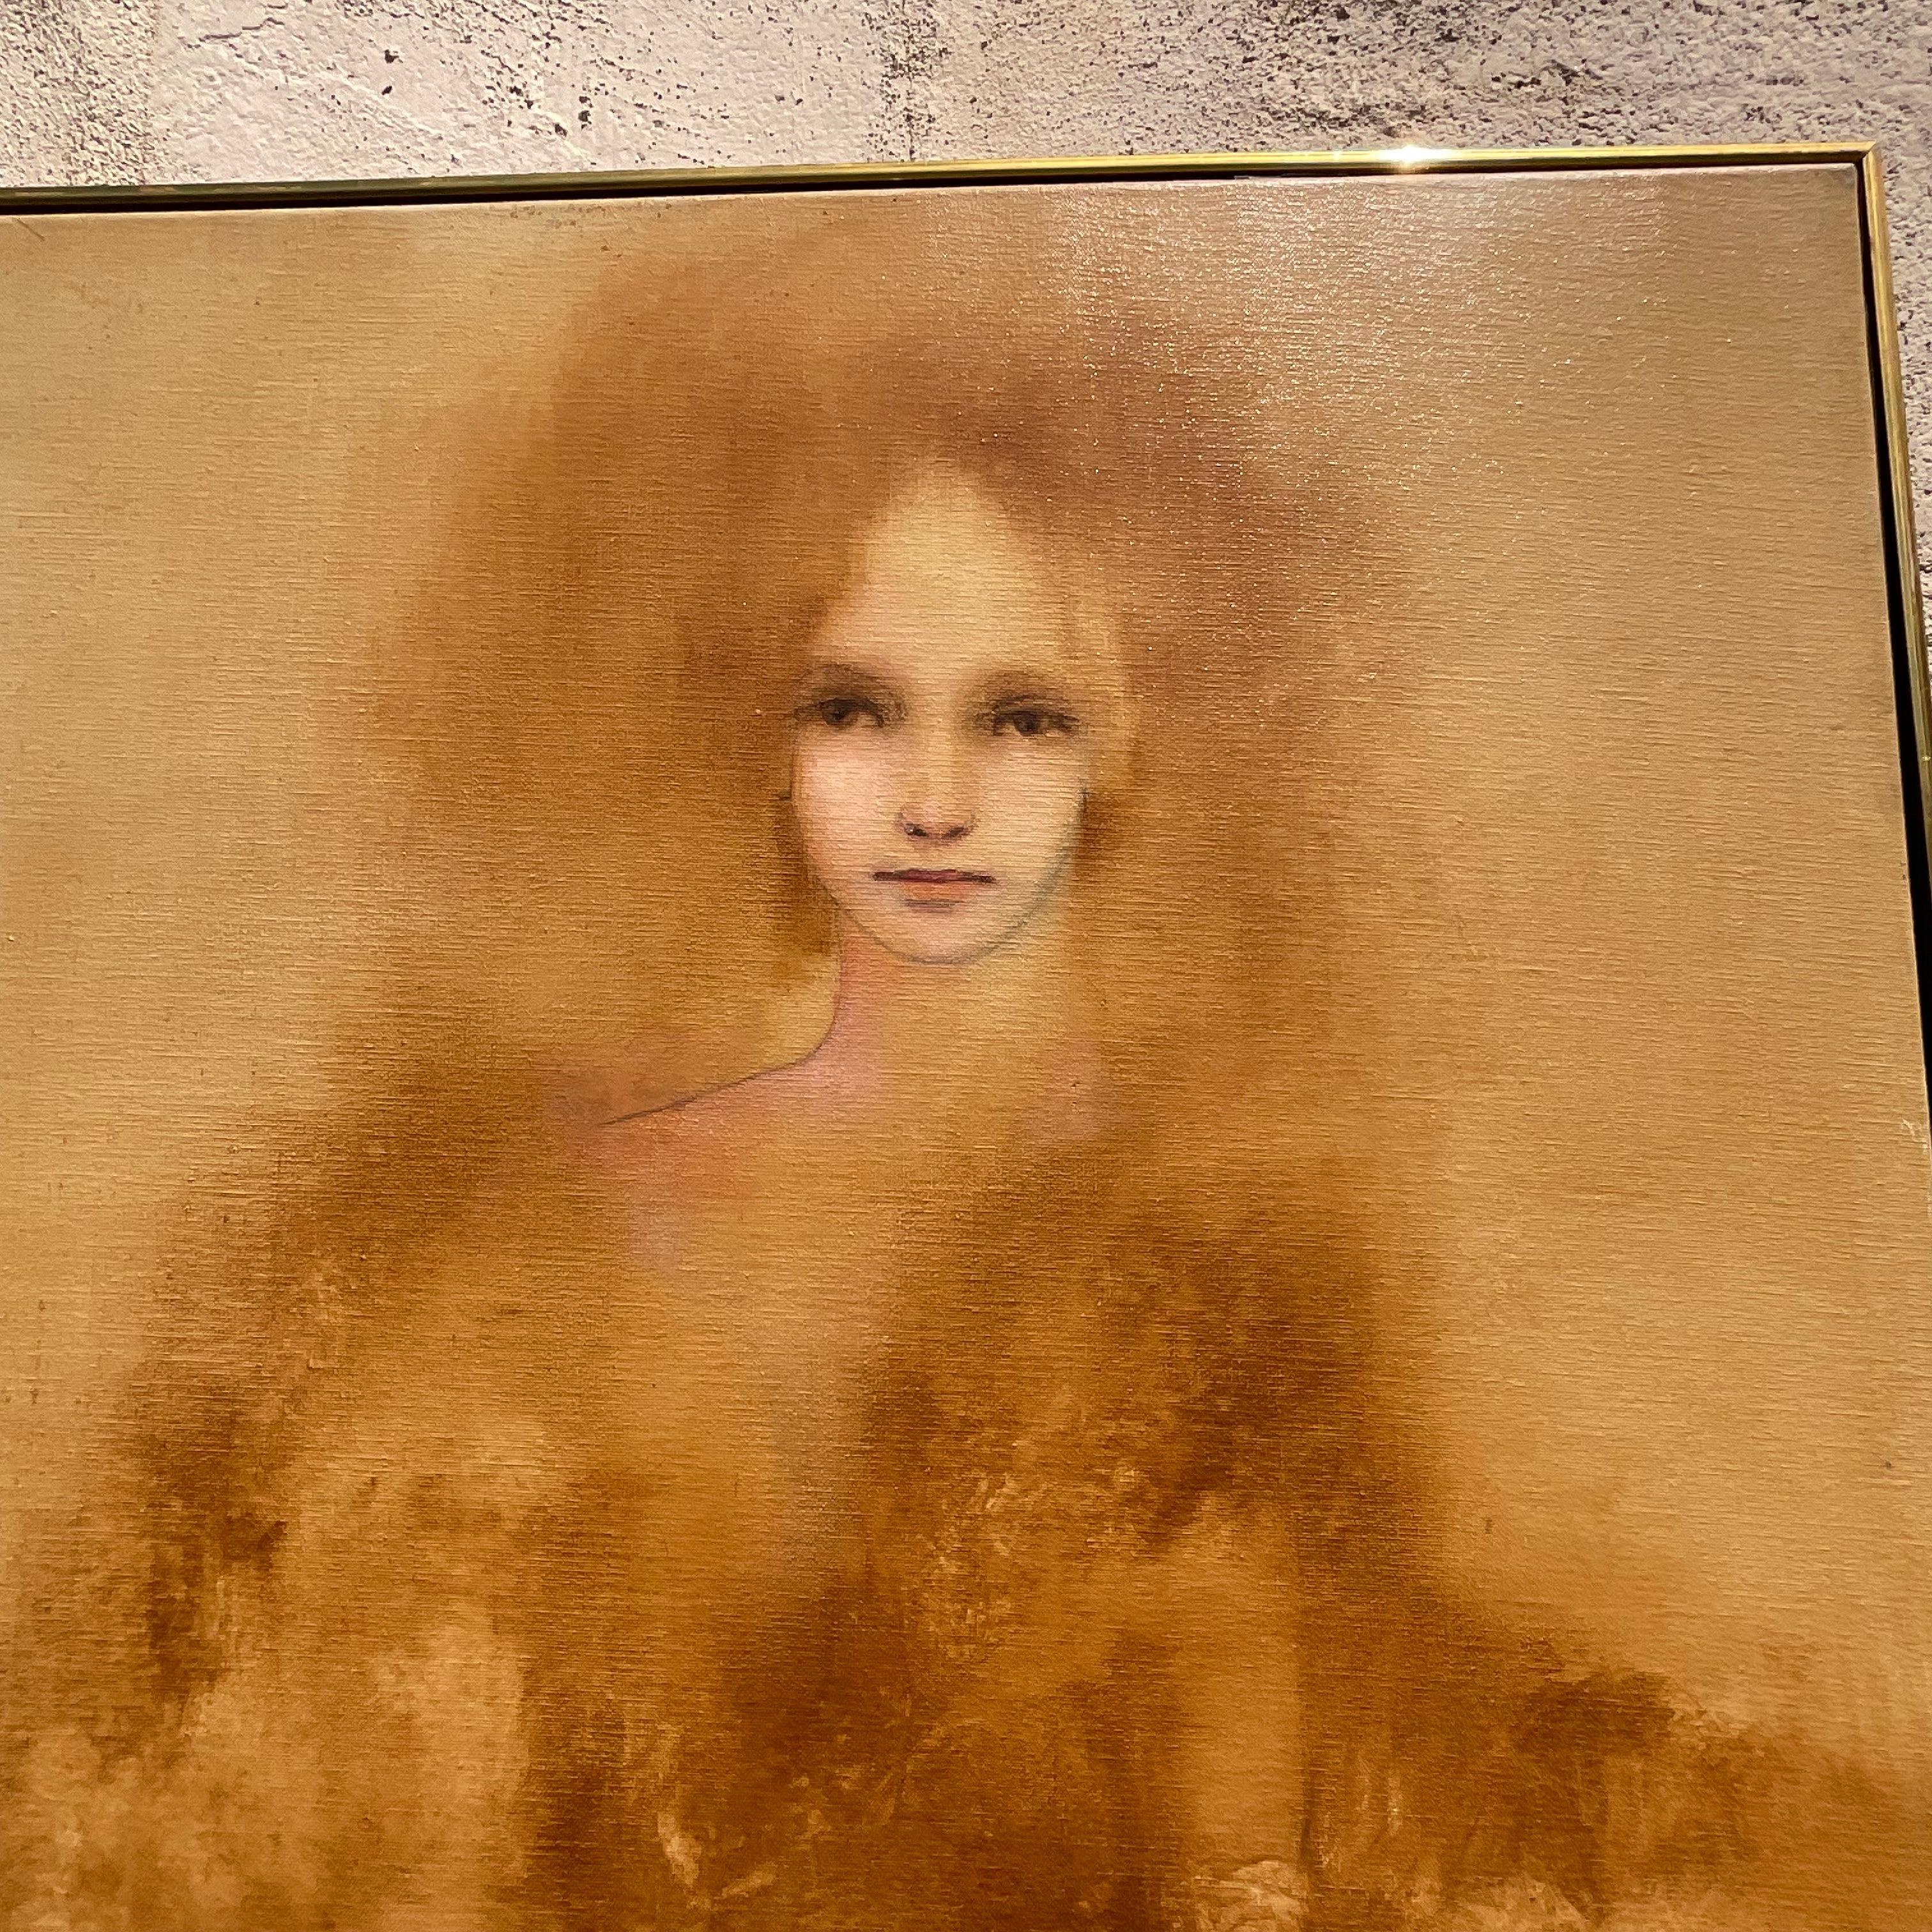 n incredible vintage Boho original oil painting on canvas. A fantastic composition of a woman in a cloudy haze. Signed by the artist. Monumental in size and drama. Acquired from a Palm Beach estate